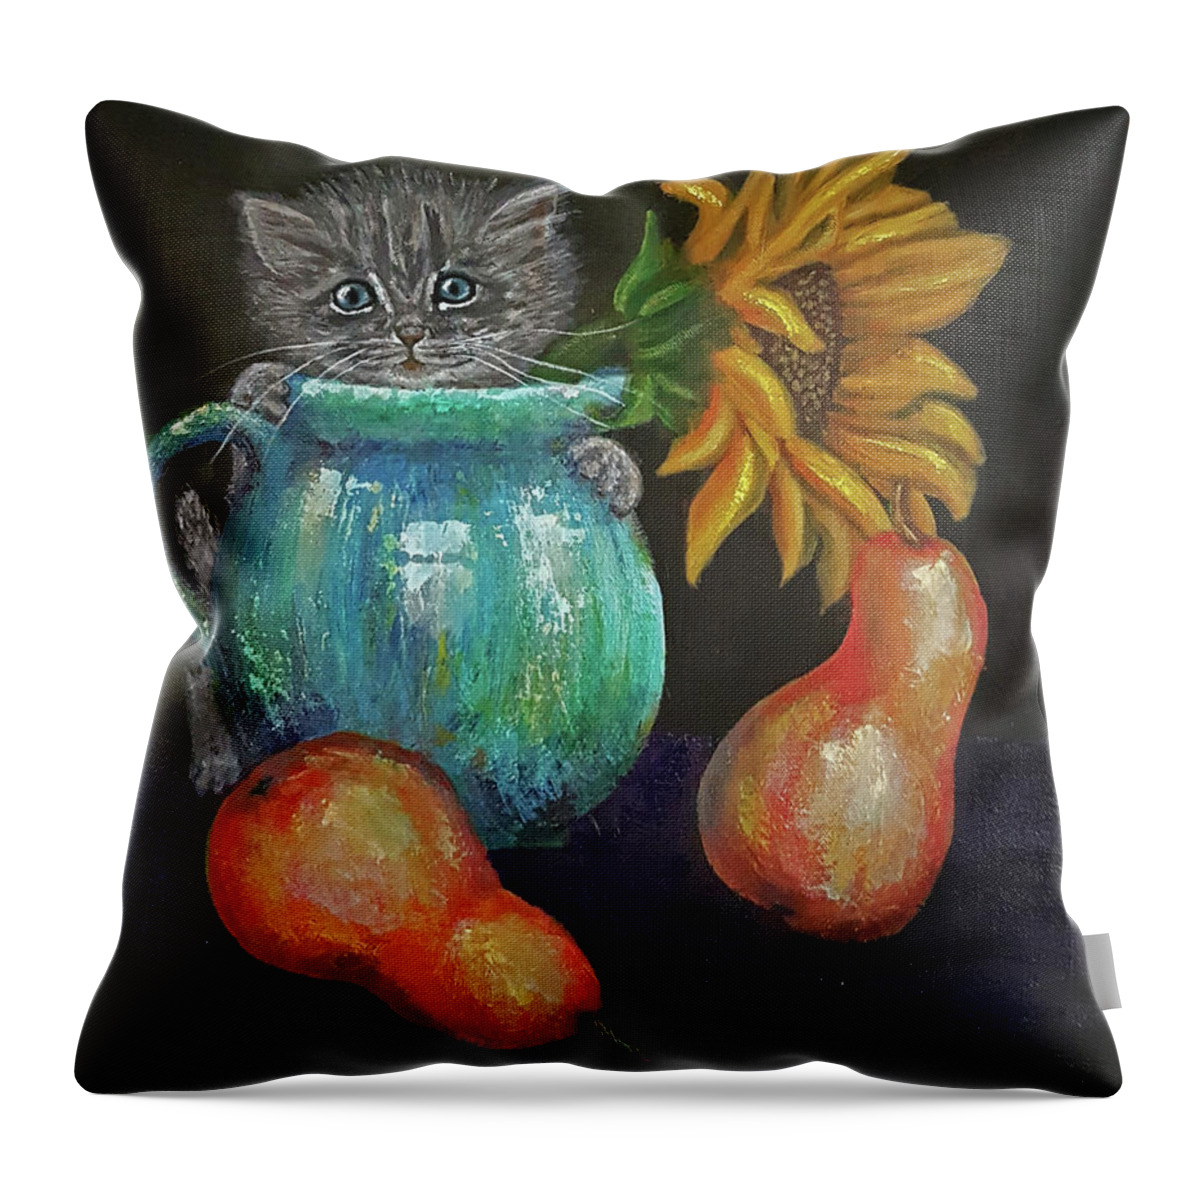 Kitten Throw Pillow featuring the painting Still Life Surprise by Perri Kelly